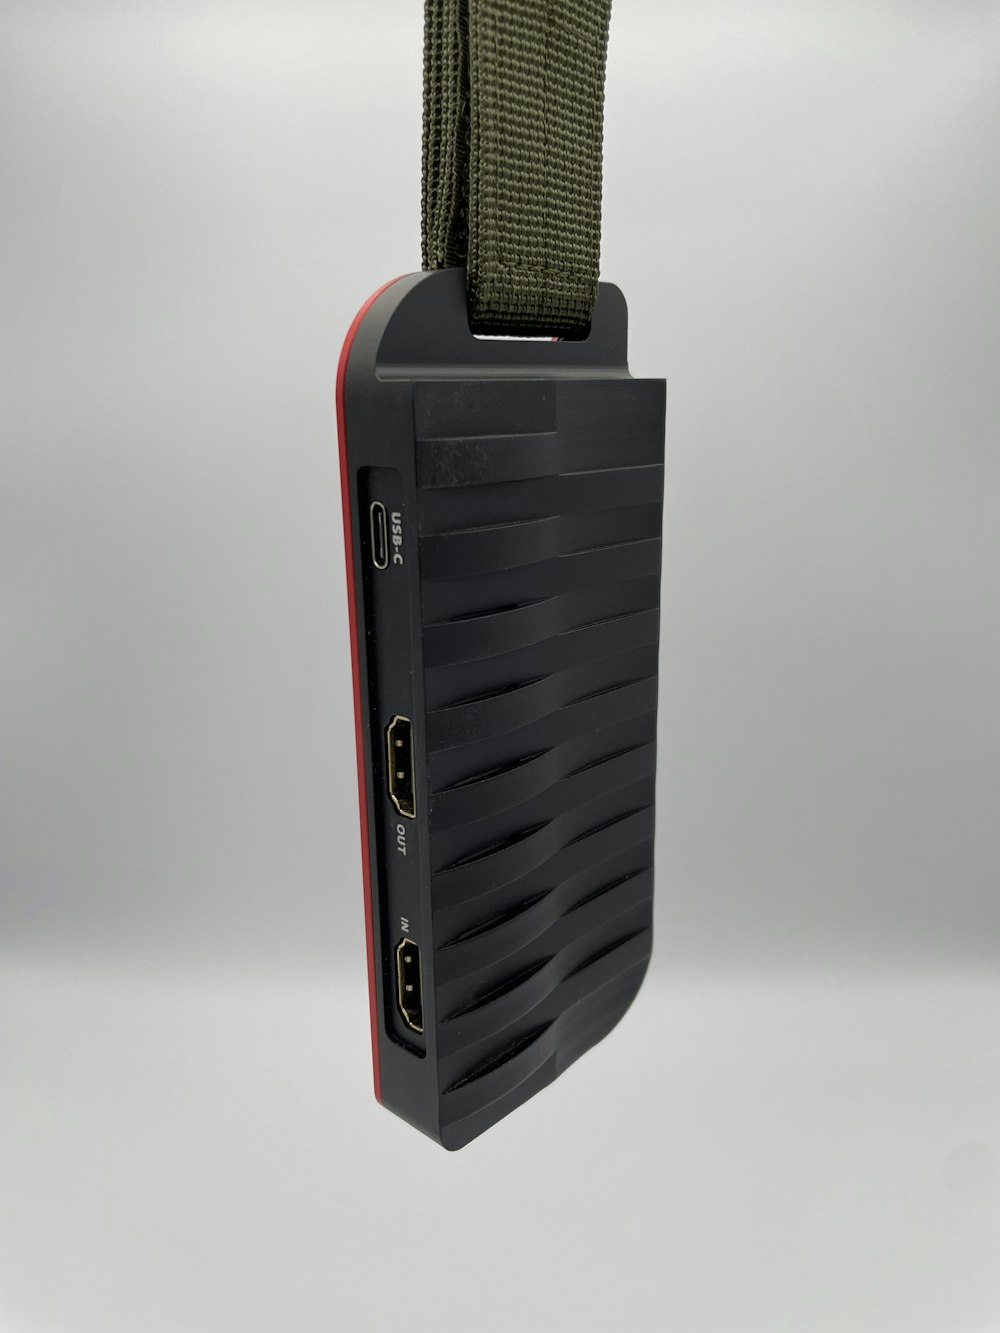 a black and red device hanging from a cord